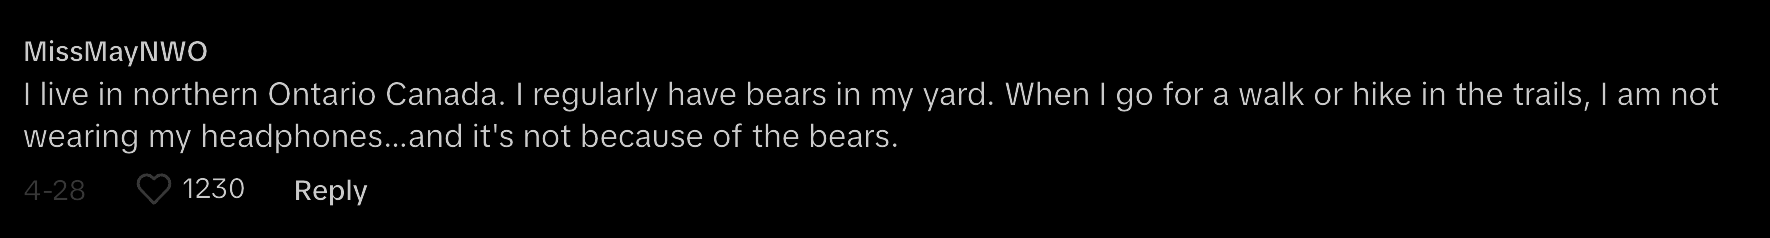 A user named MissMayNNWO comments about walking in northern Ontario, Canada, without headphones despite encountering bears. 1230 likes and 28 replies